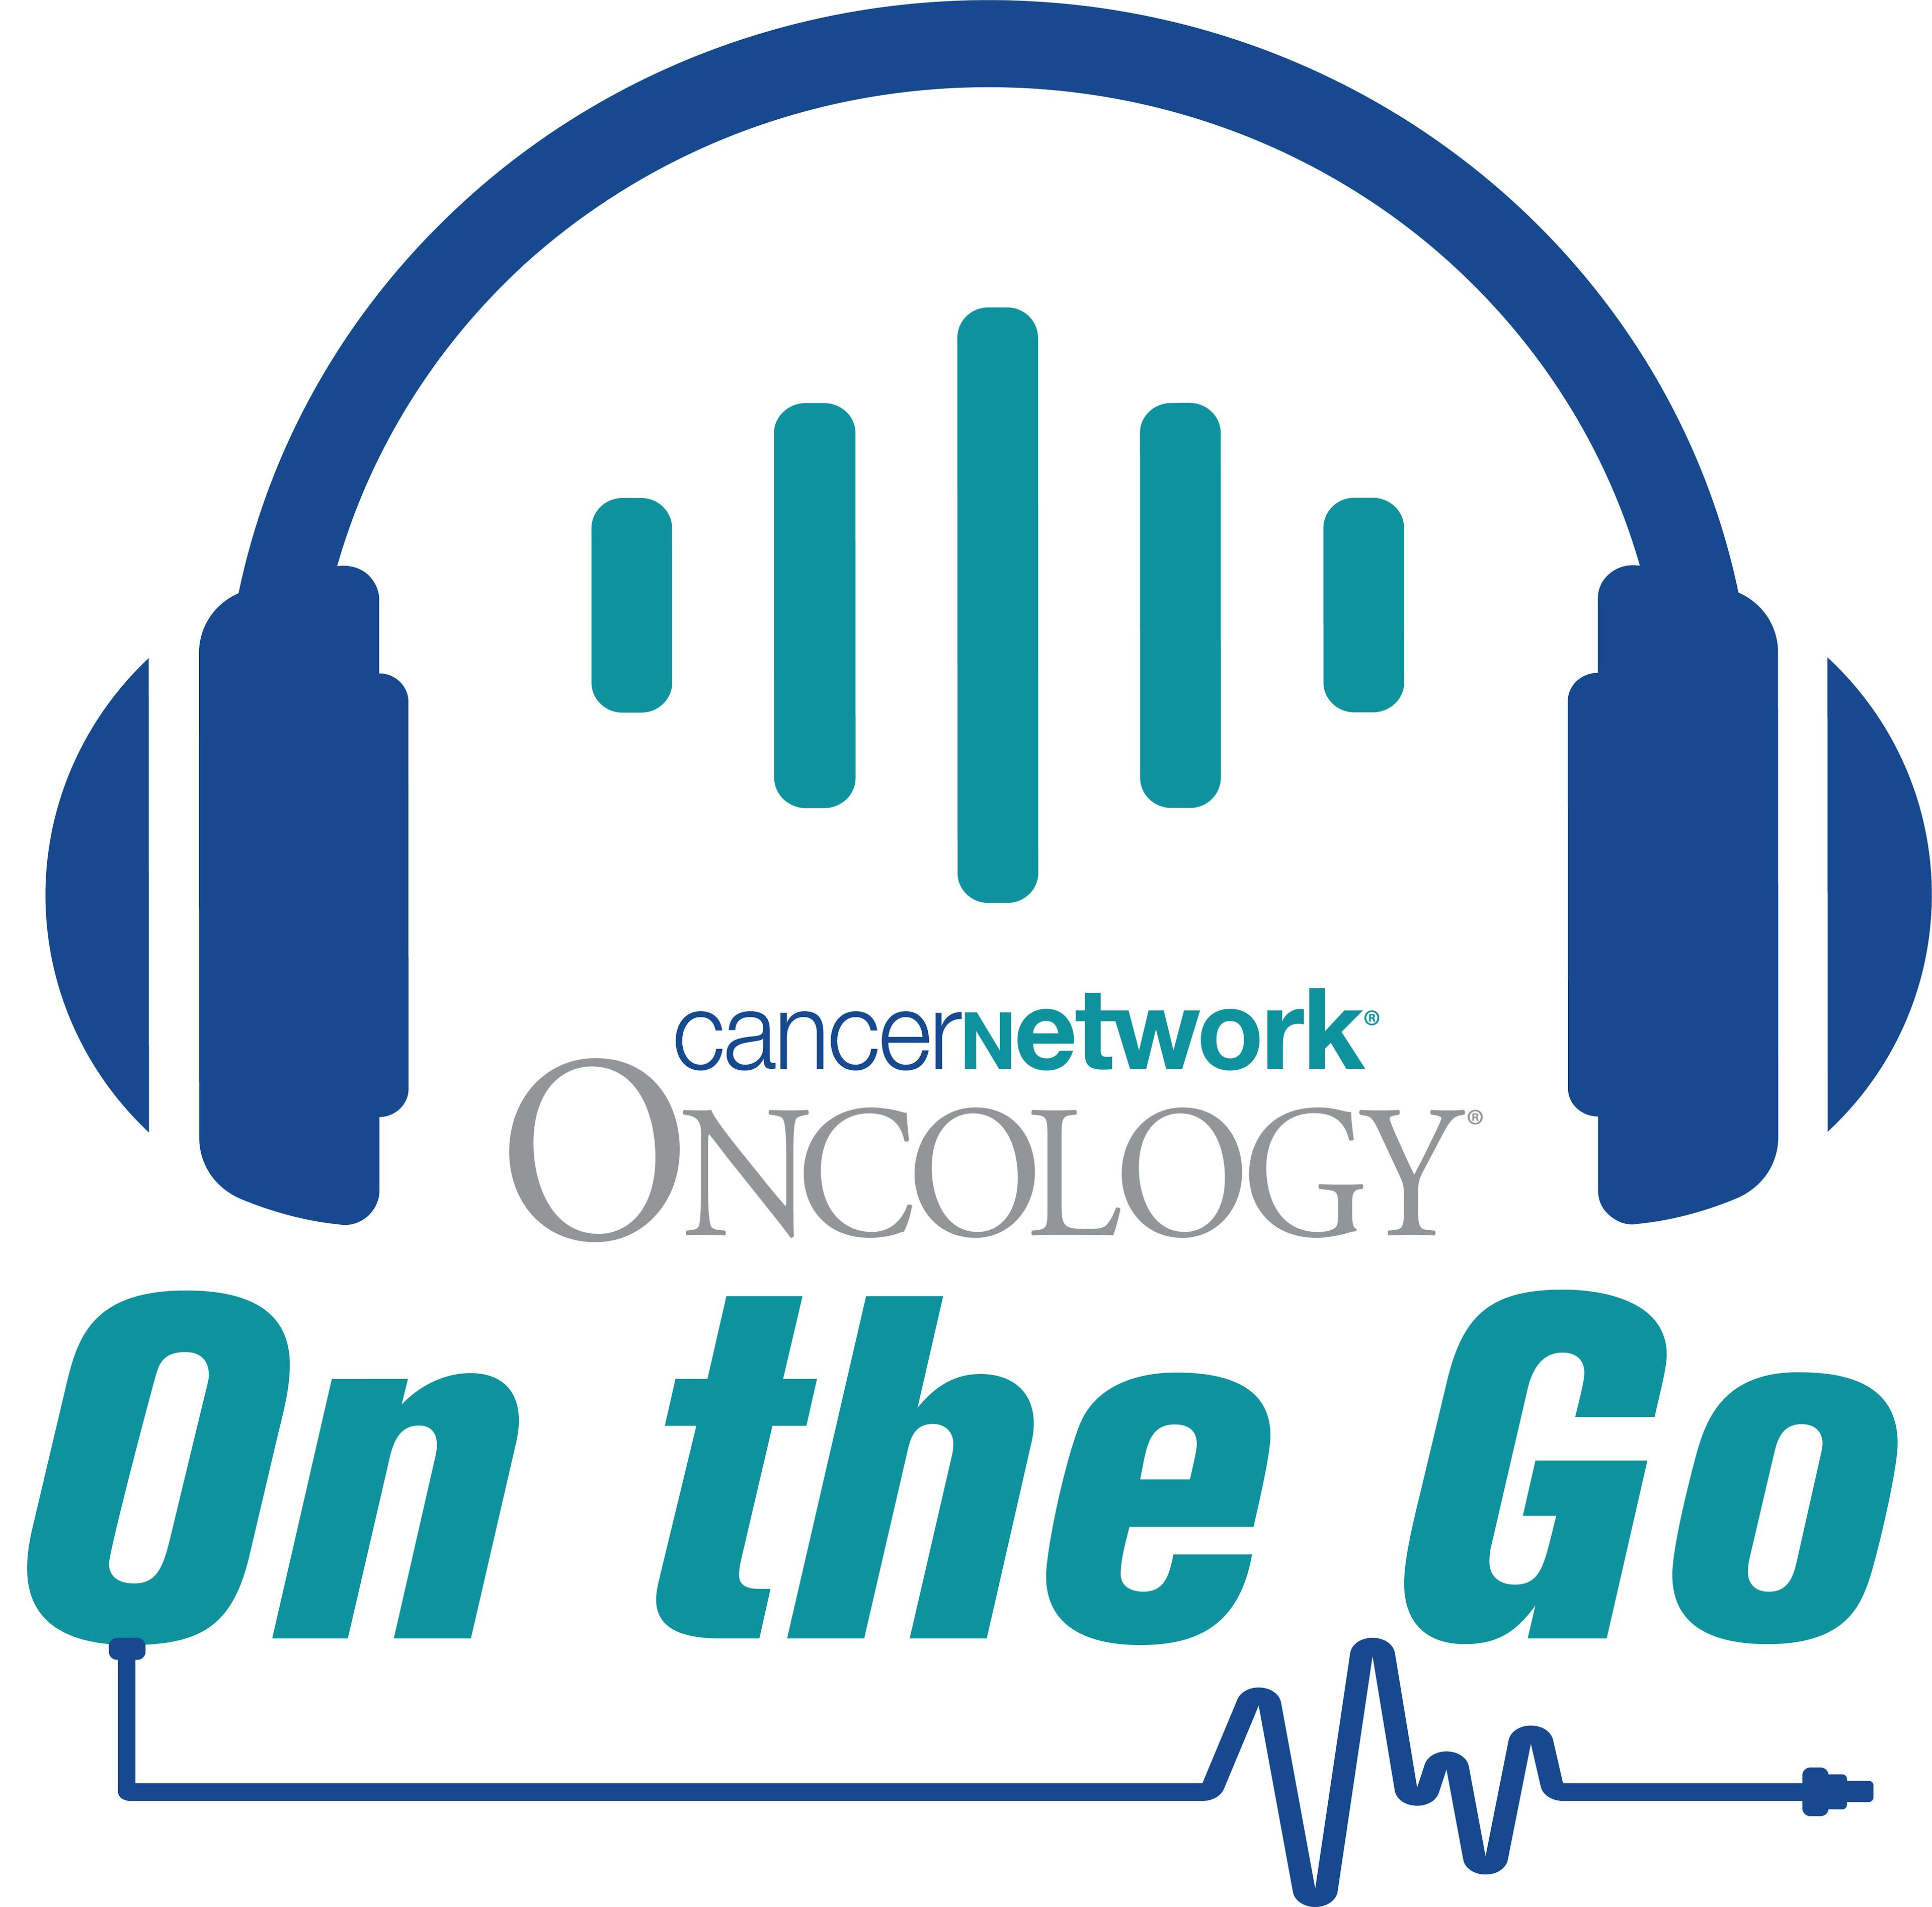 Experts discuss the current continuum of care for patients with EGFR exon 20 non–small cell lung cancer and findings from studies including the phase 2 CHRYSALIS trial.